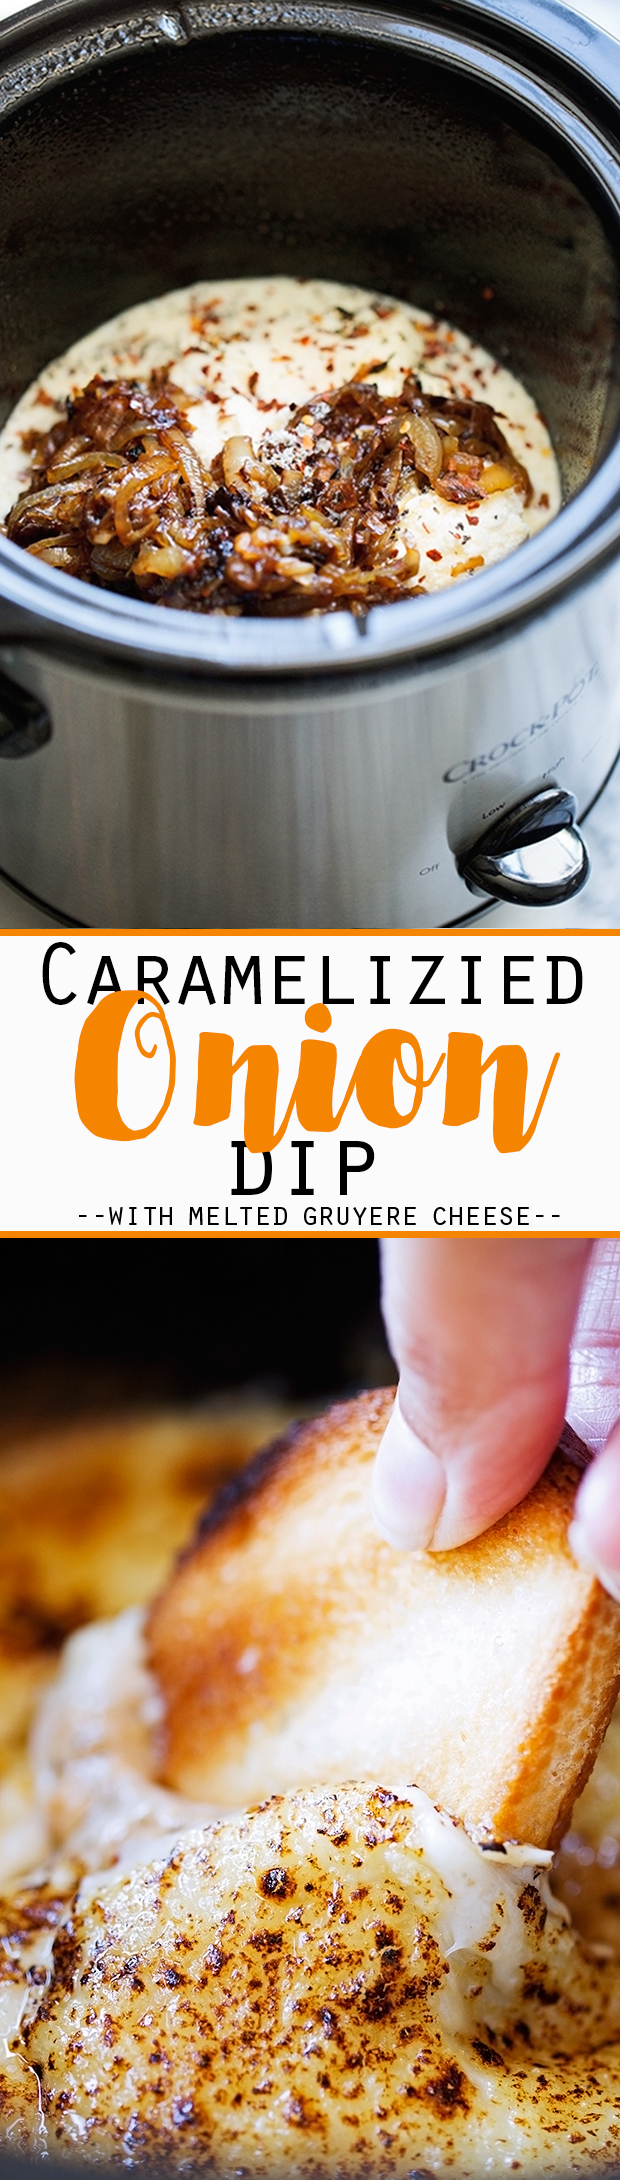 Hot Caramelized Onion Dip {Slow Cooker} - An easy dip to serve to party guests! The crowd WILL go wild! #caramelizedonions #dip #oniondip #slowcooker | Littlespicejar.com